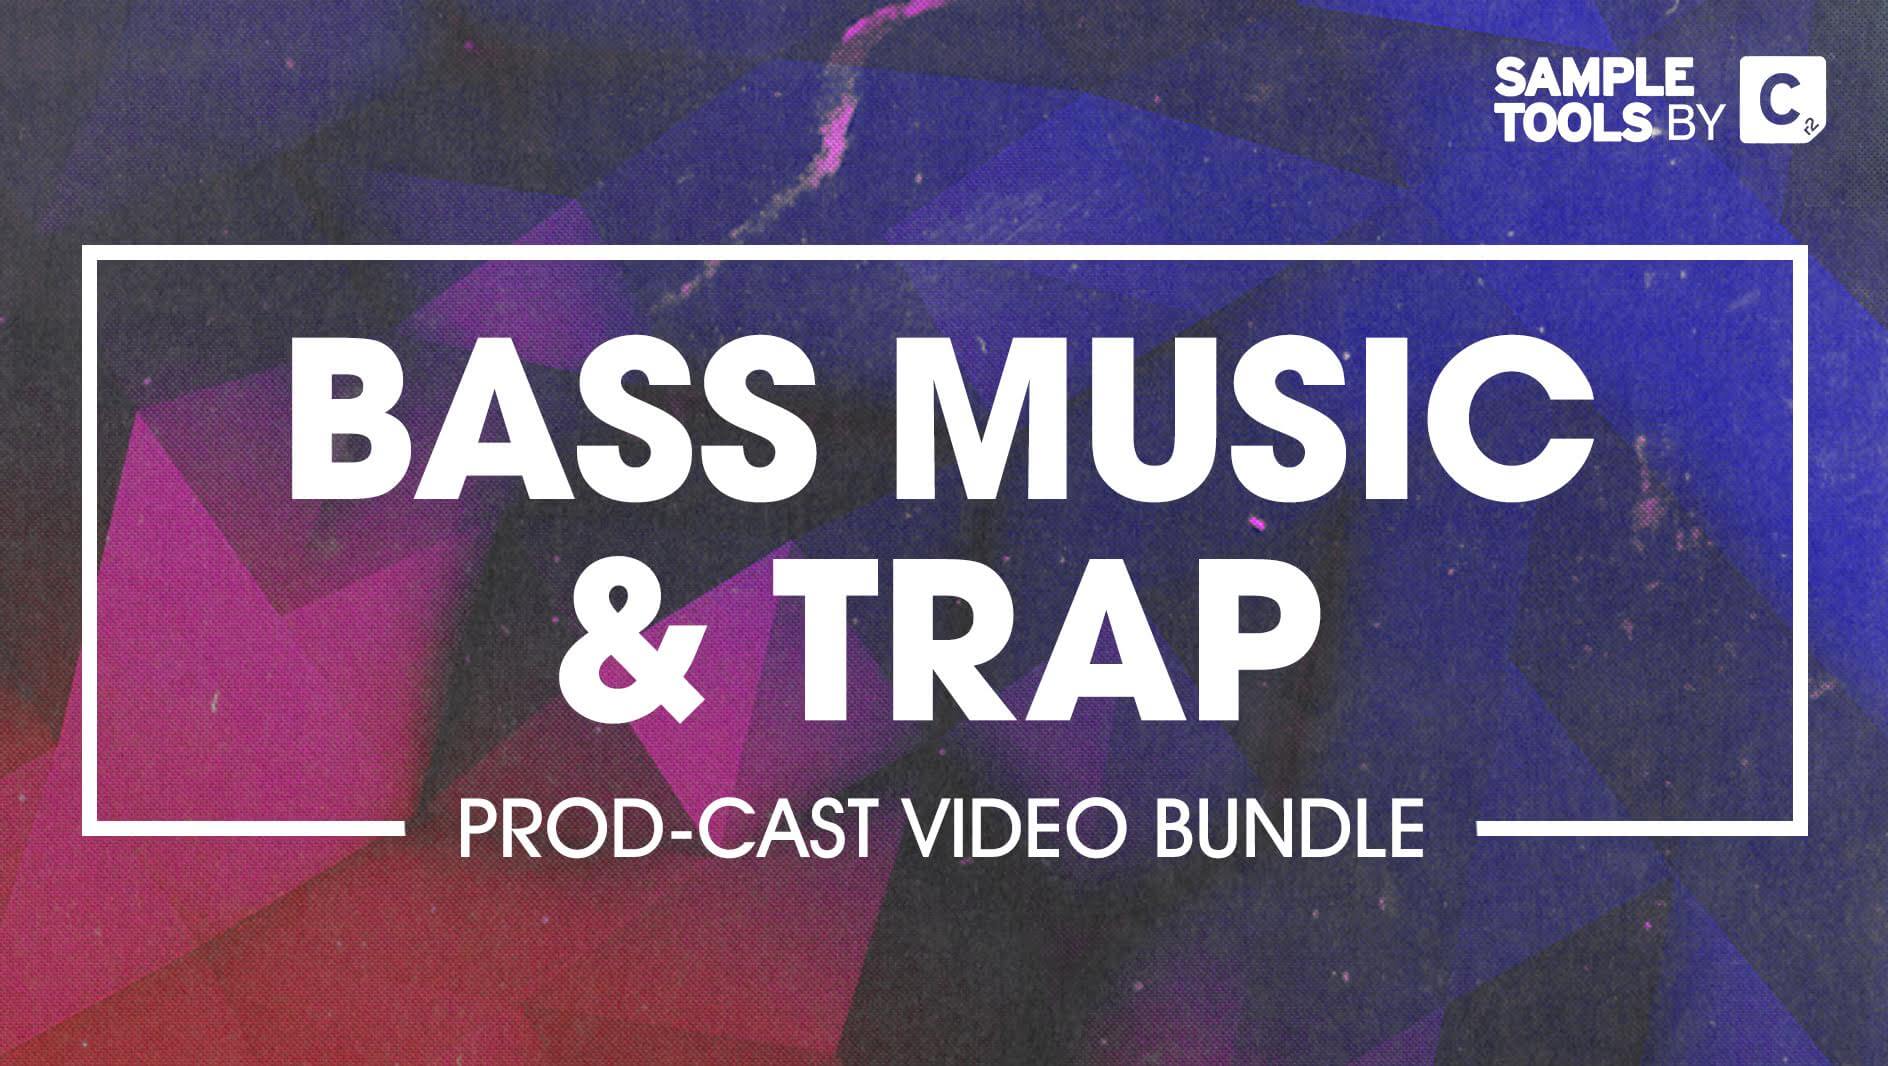 Bass Music & Trap by Sample Tools by Cr2